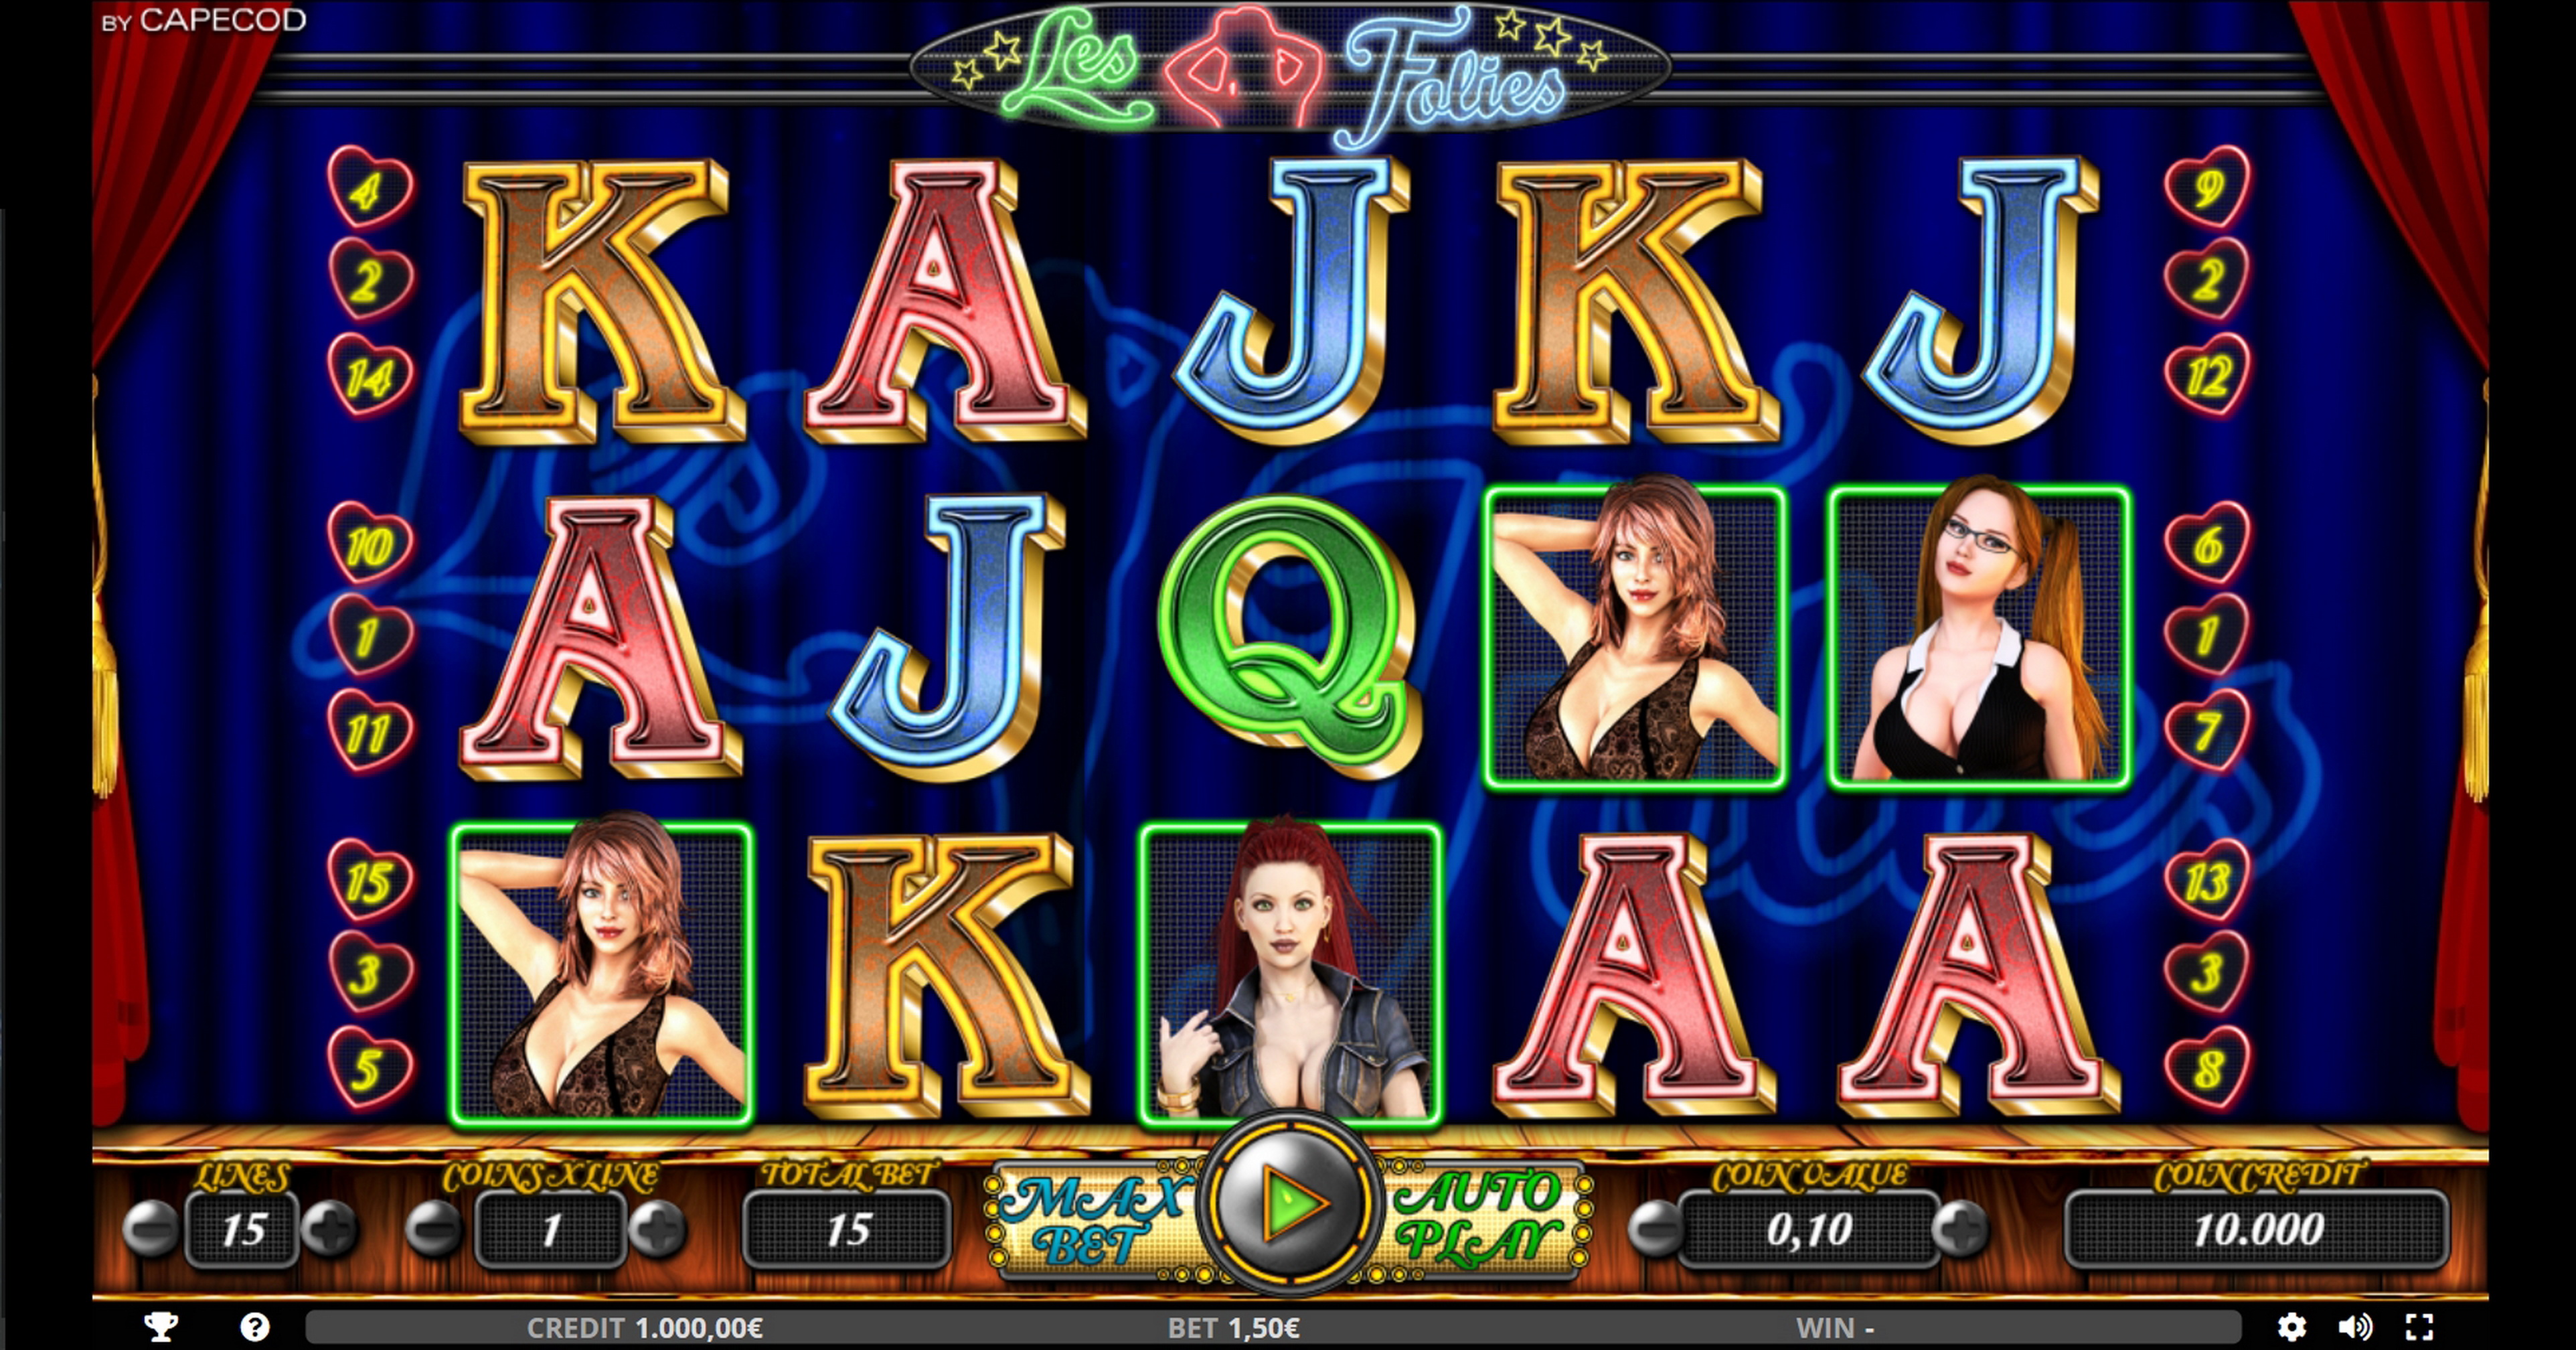 Reels in Les Folies Slot Game by Capecod Gaming